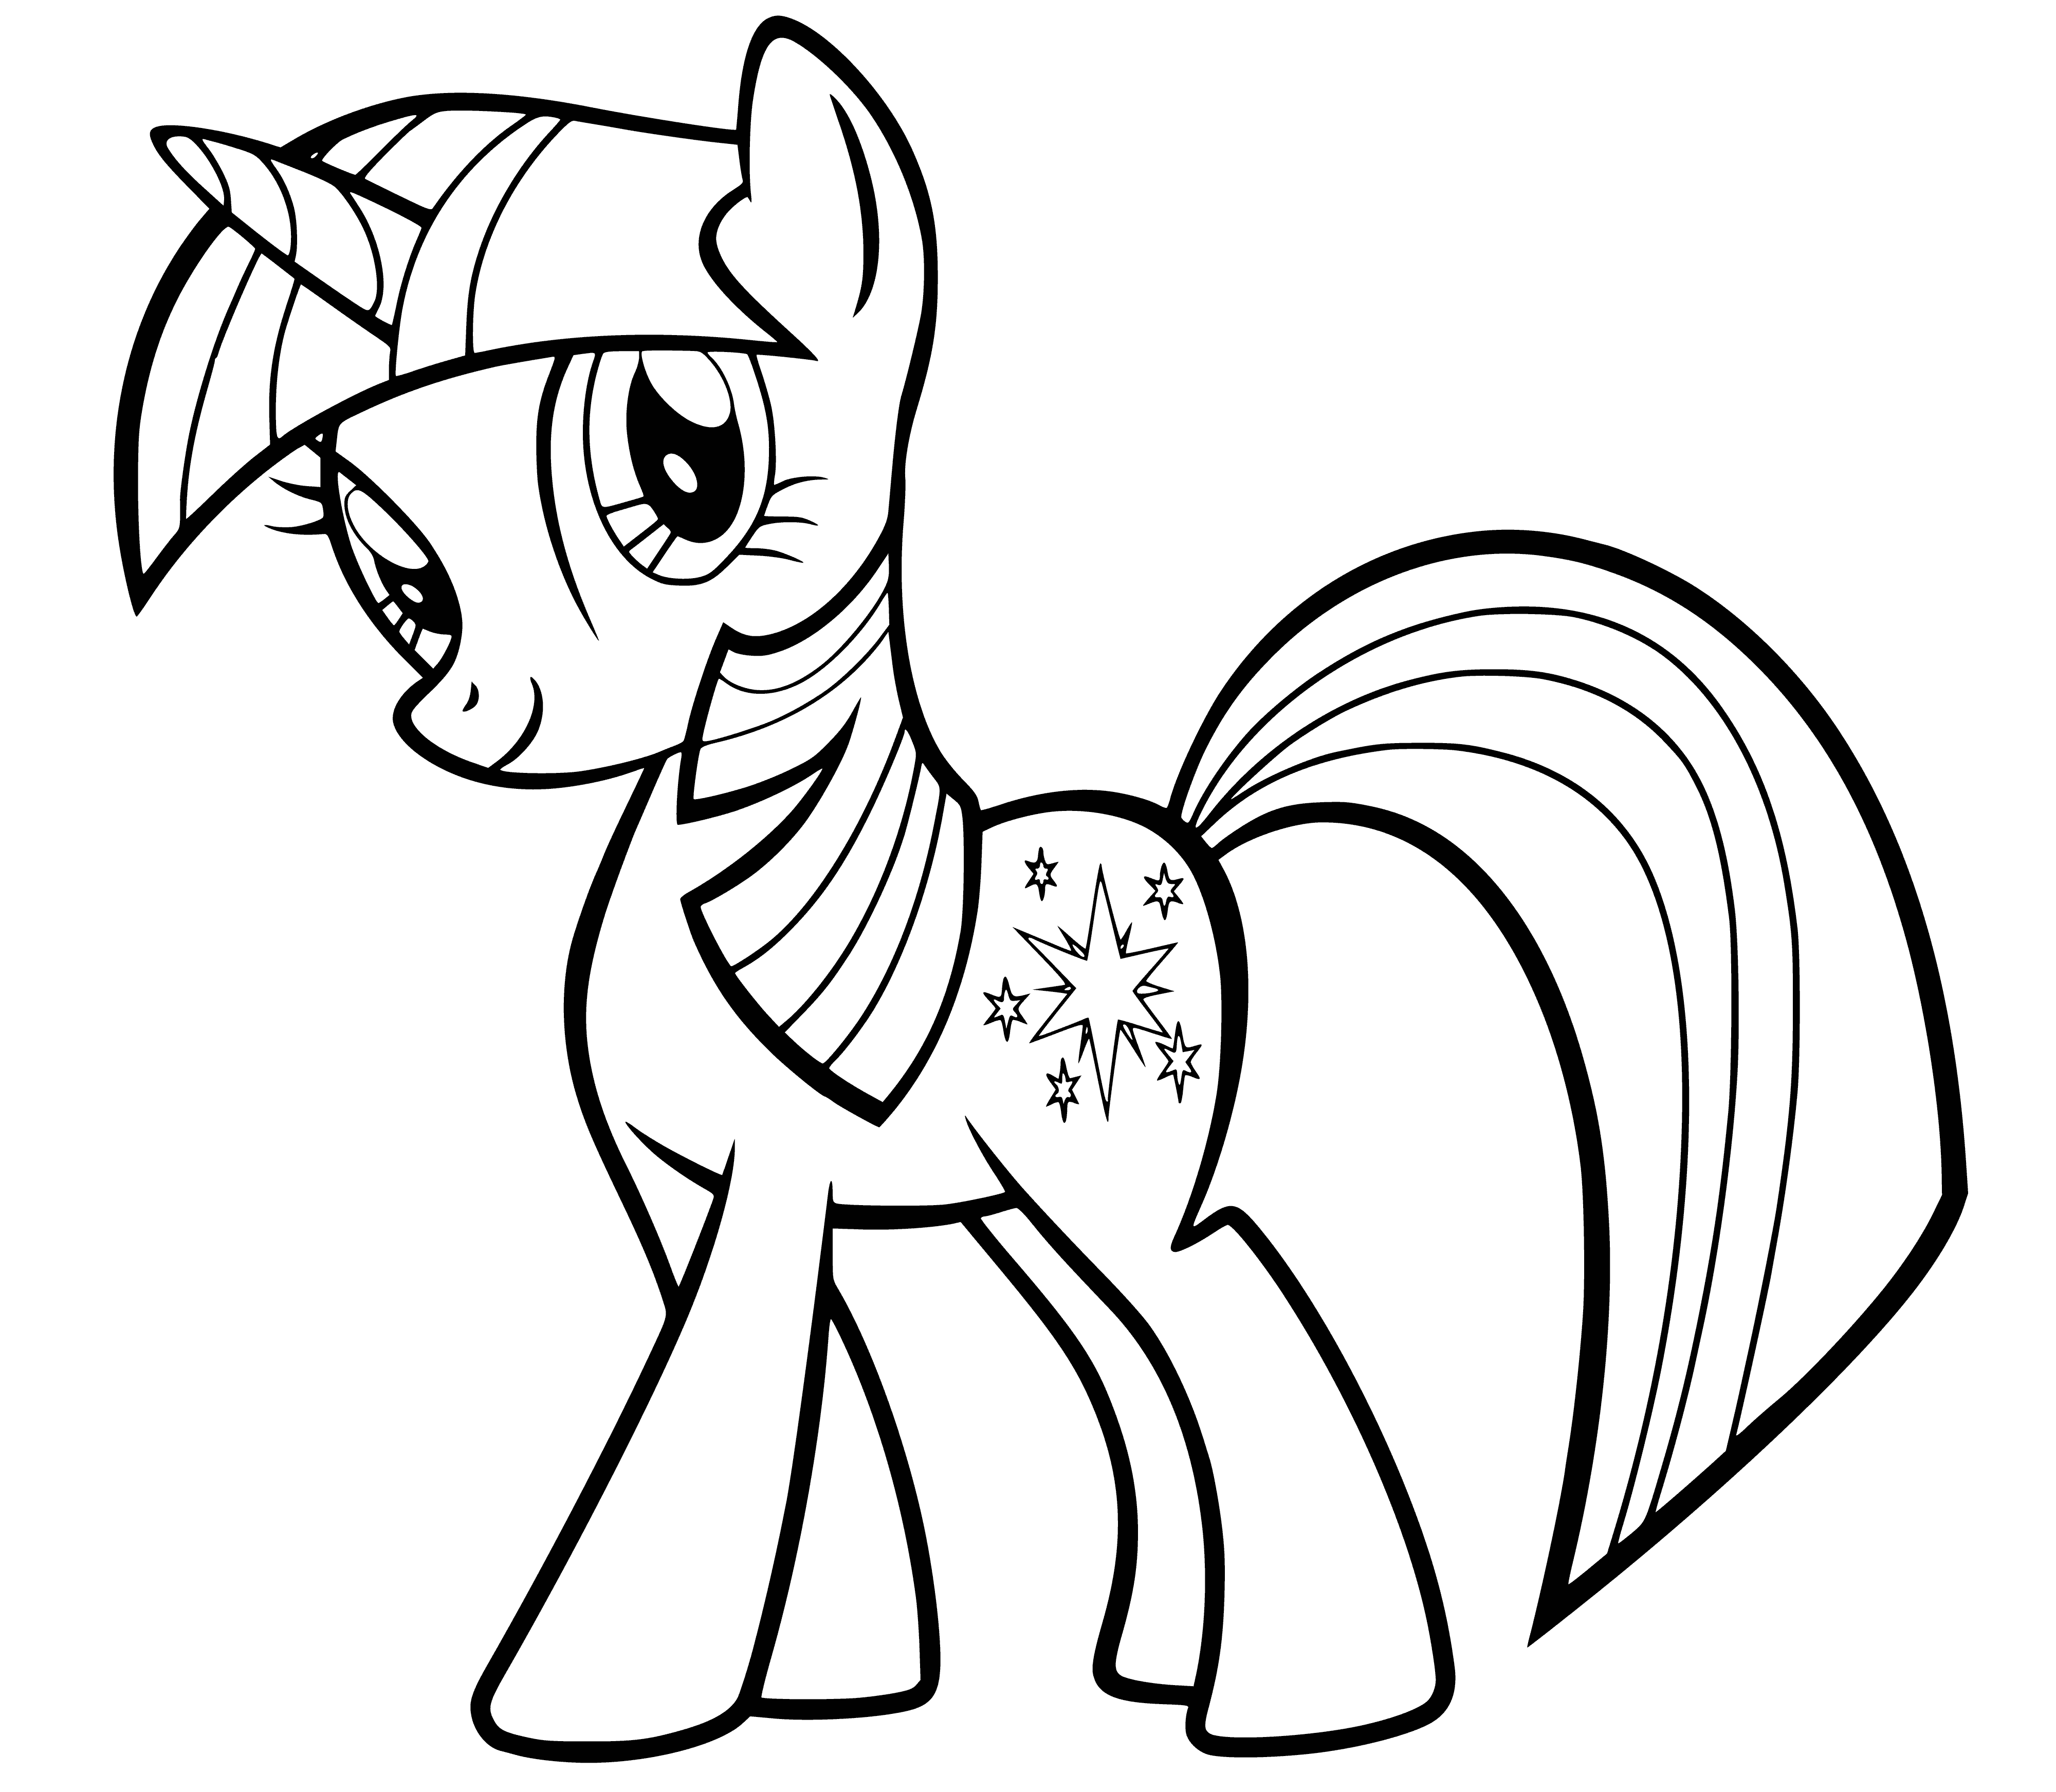 coloring page: Twilight Sparkle is an alicorn princess who leads the Mane Six, founding the School of Friendship to represent the element of magic.